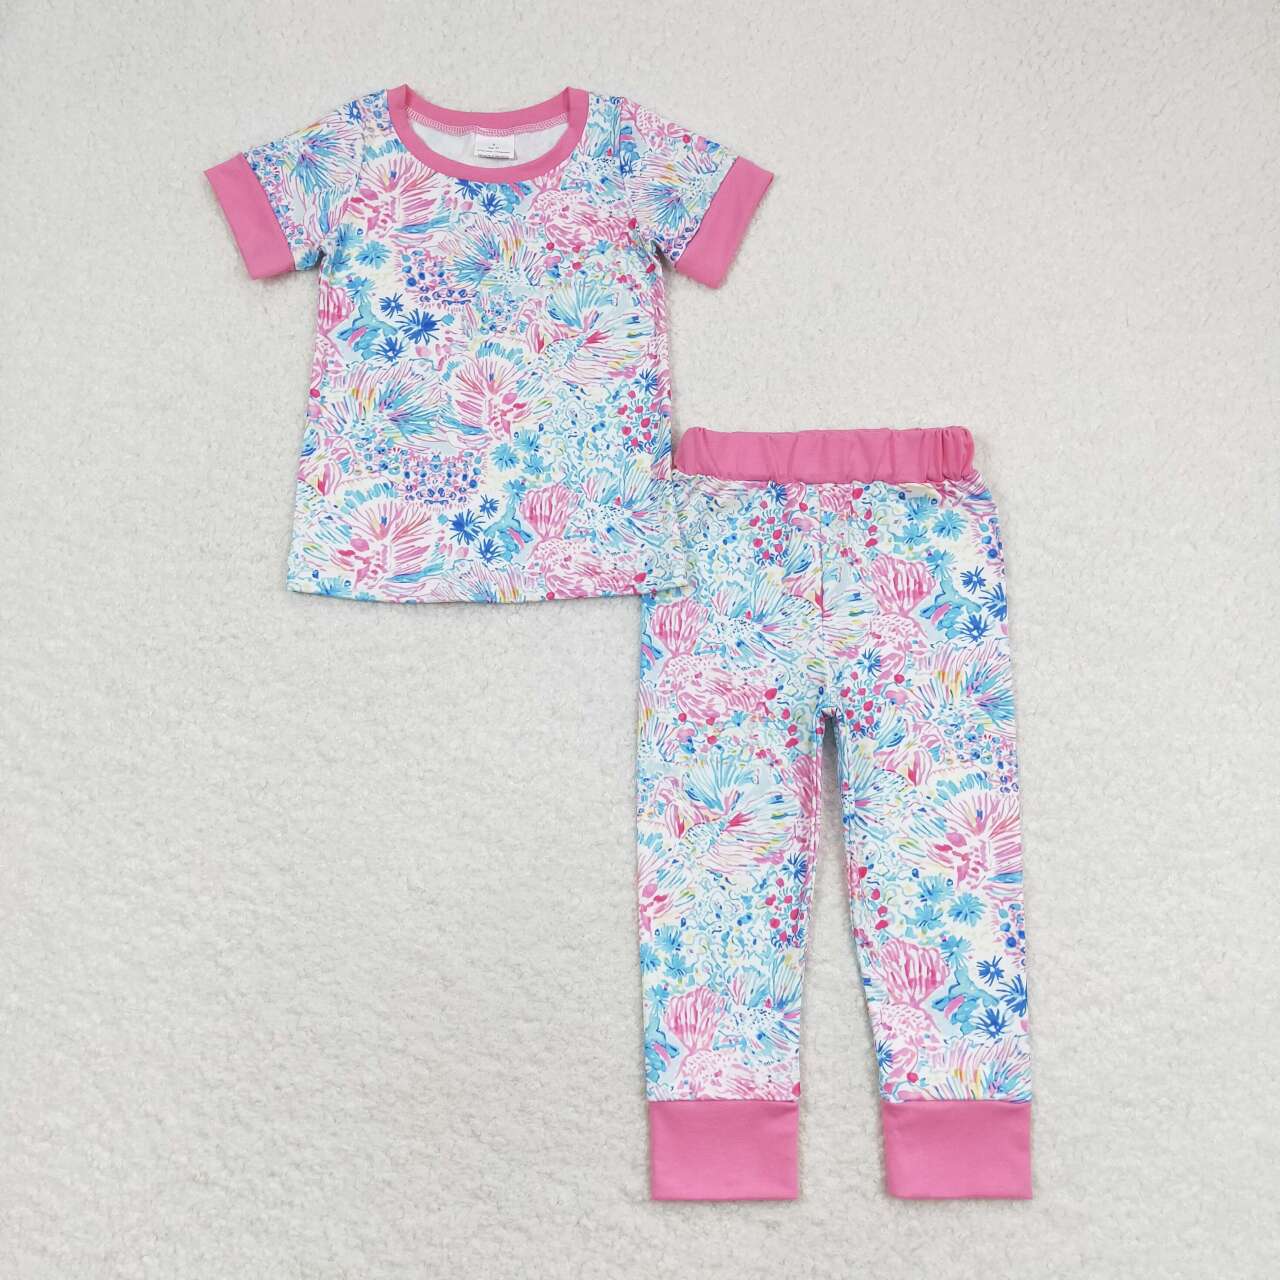 GSPO1550 Colorful Water Flowers Searweed Print Girls Pajamas Clothes Set